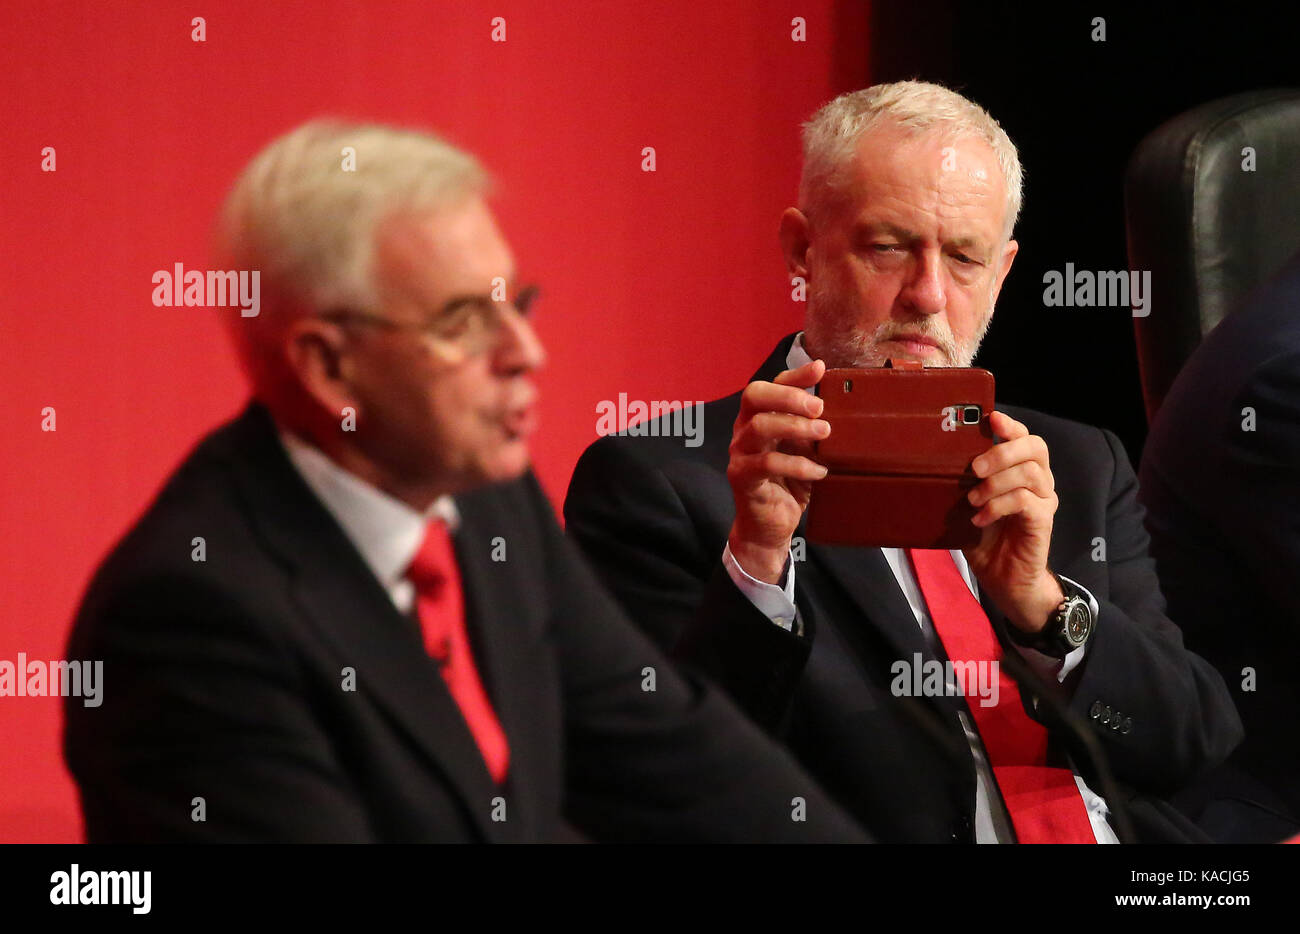 Labour leader Jeremy Corbyn takes a photography of Shadow Chancellor of the Exchequer John McDonnell. Stock Photo